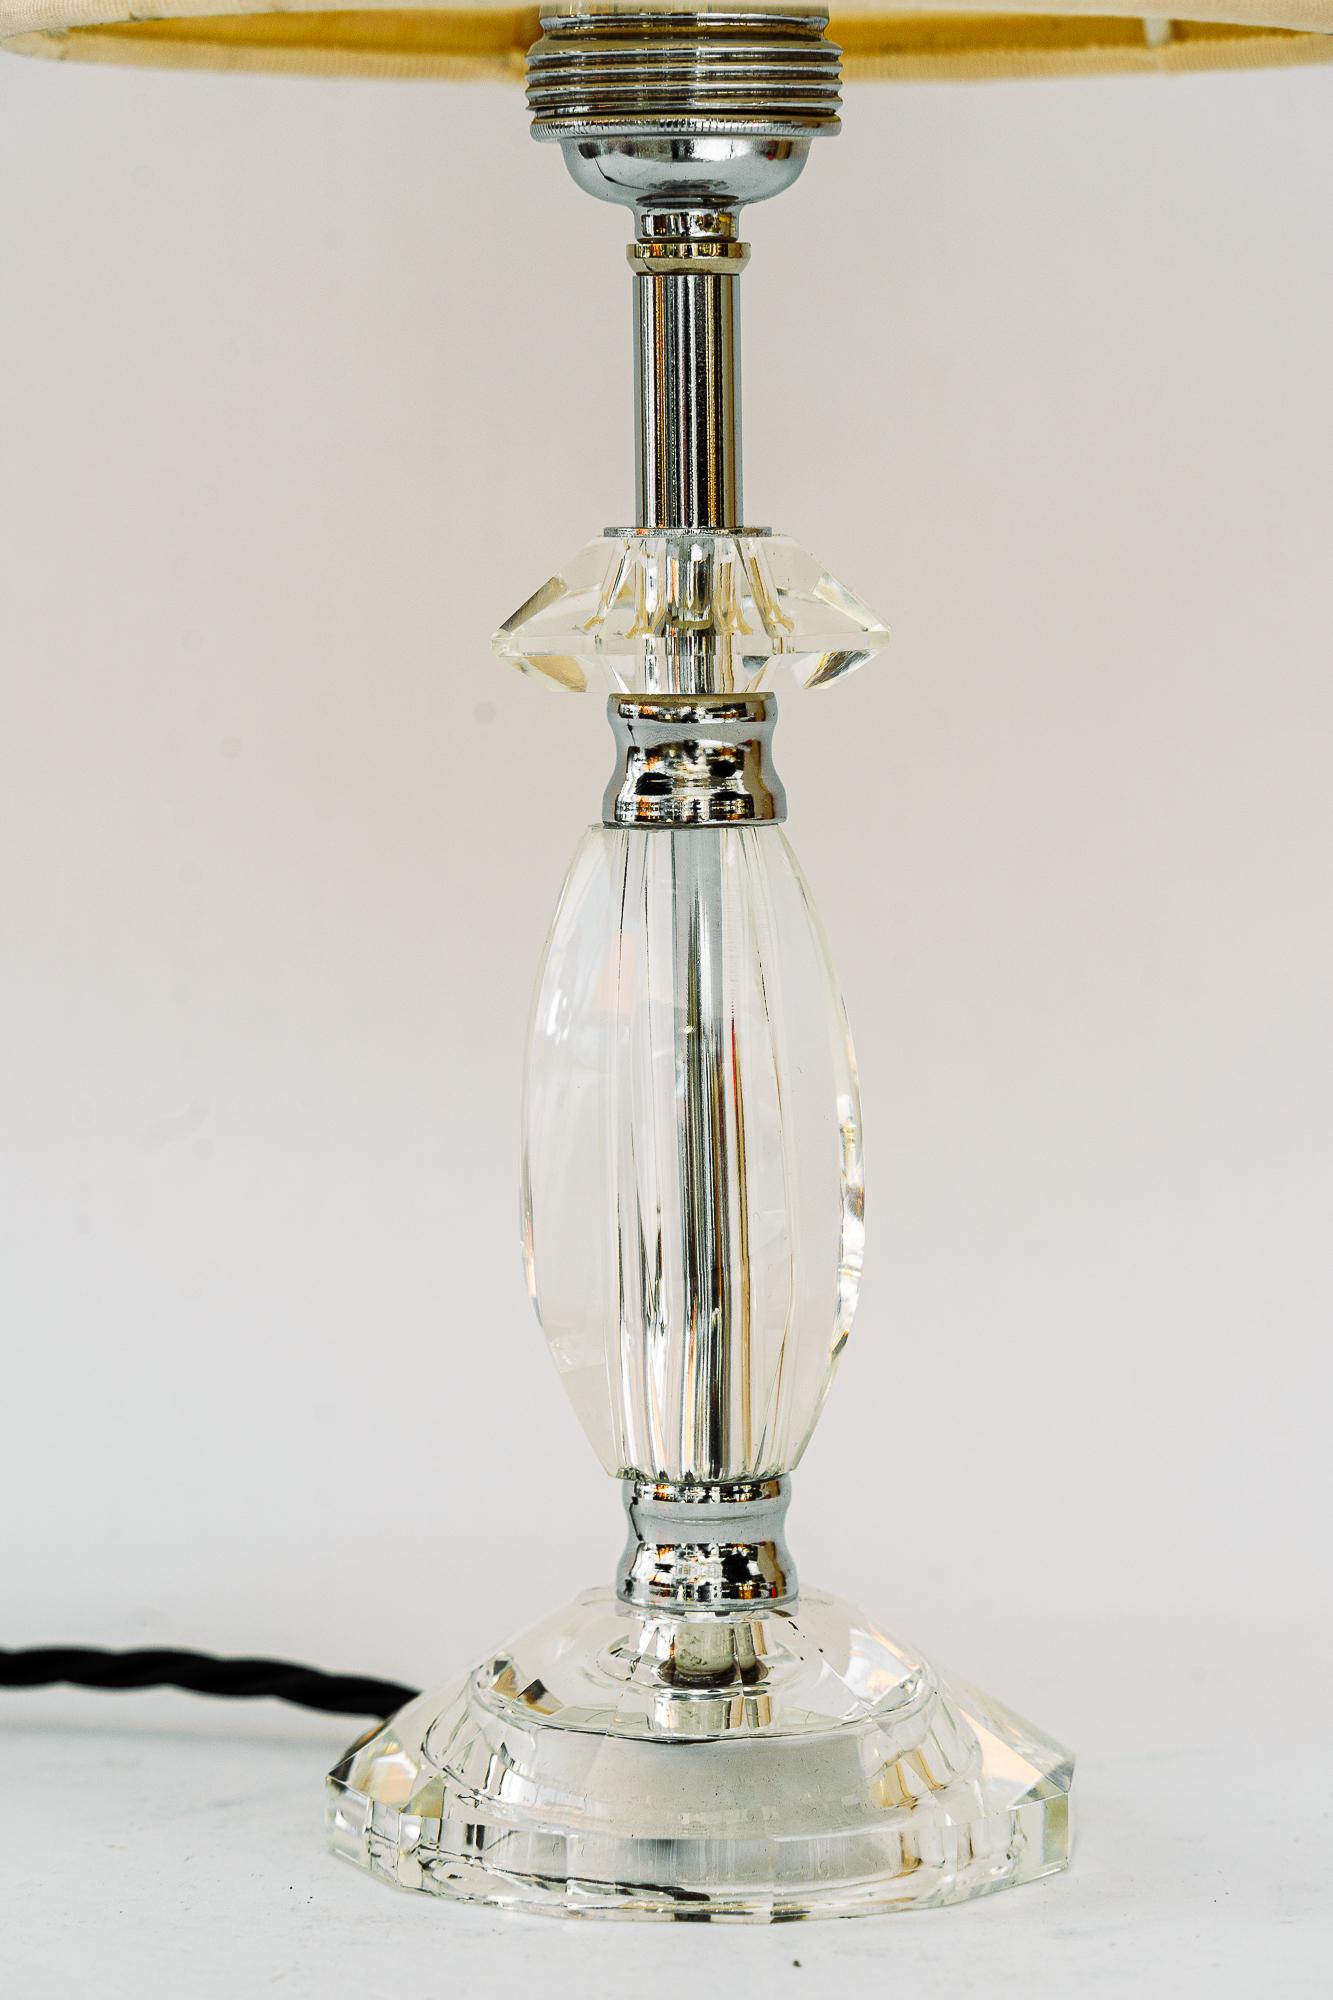 Glass table lamp with chrome parts and fabric shade vienna around 1960s
The fabric shade is replaced ( new )